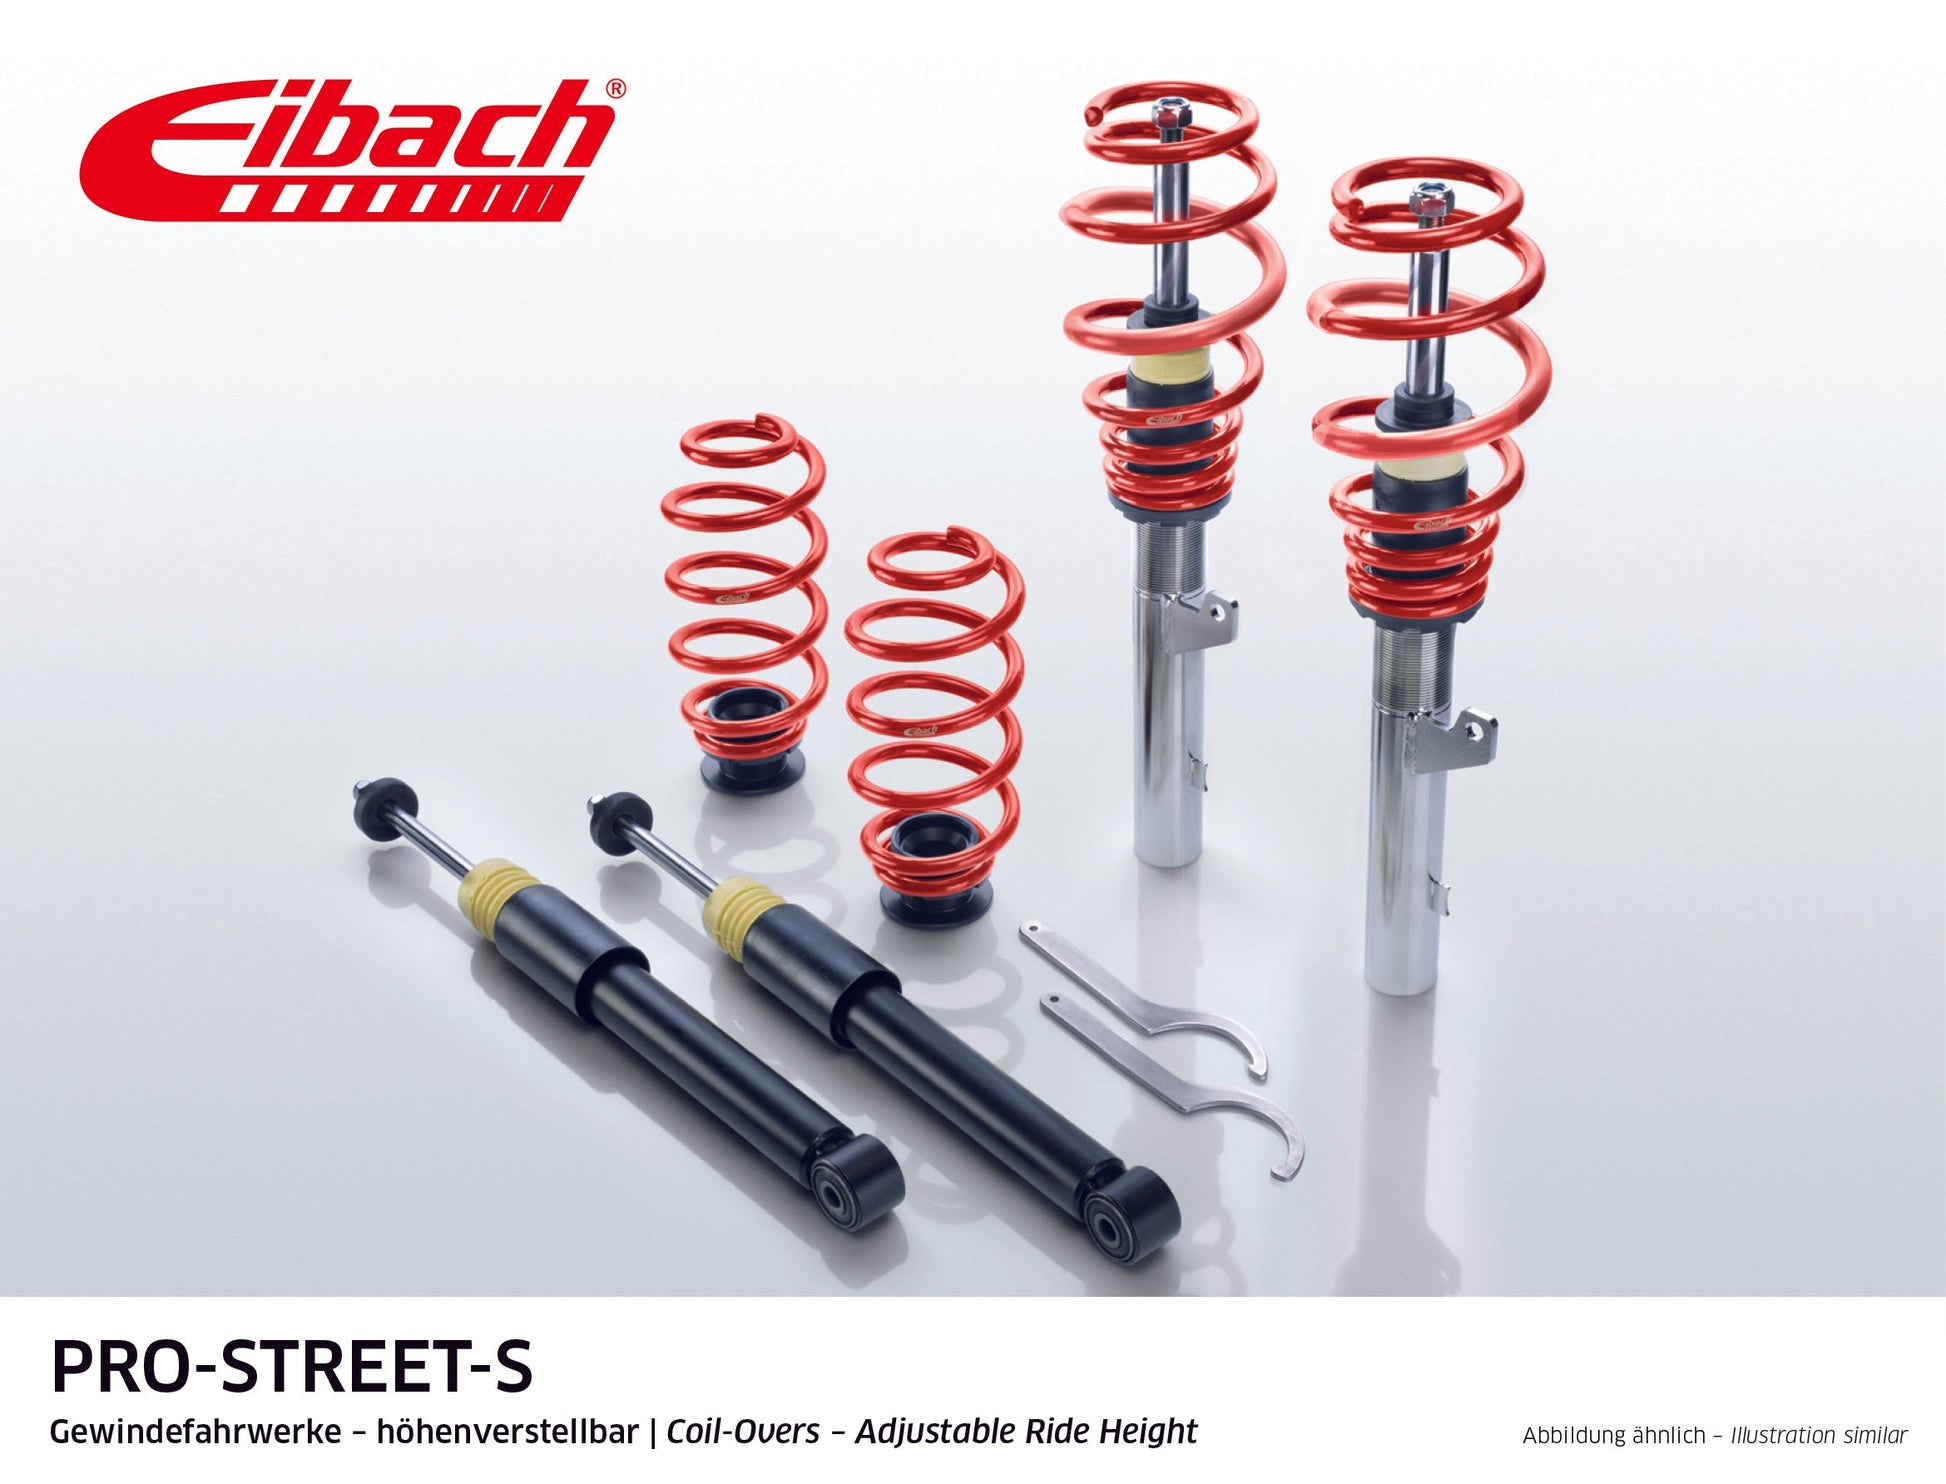 Eibach Pro-Street Coilover (PSS65-85-051-04-22) at £1100.73